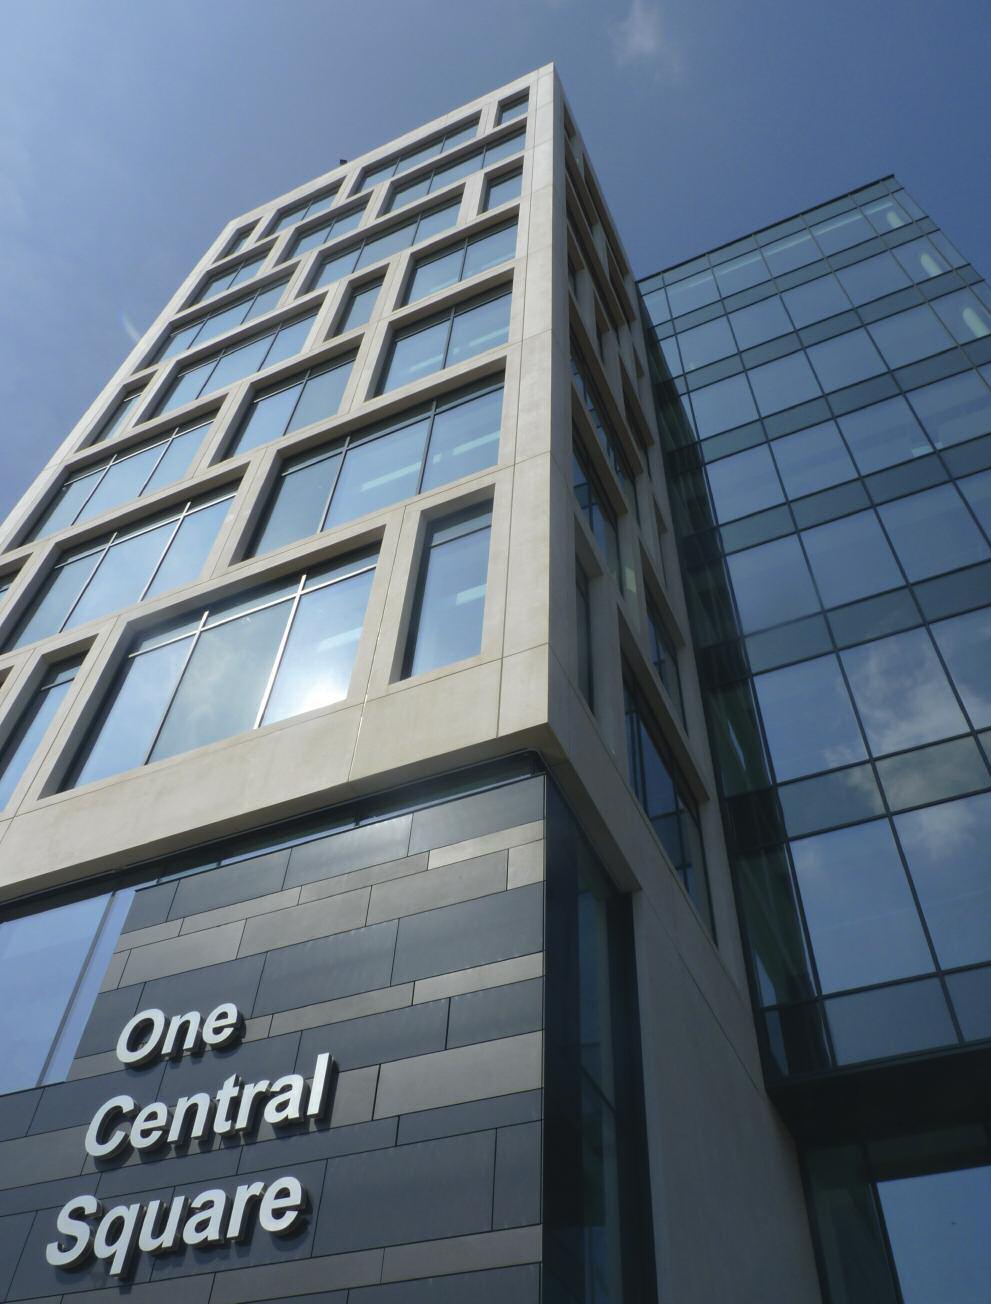 One Central Square, Cardiff Architect: Rio Architects Contents Curtain Wall Design Considerations Zone or Mullion Drained?